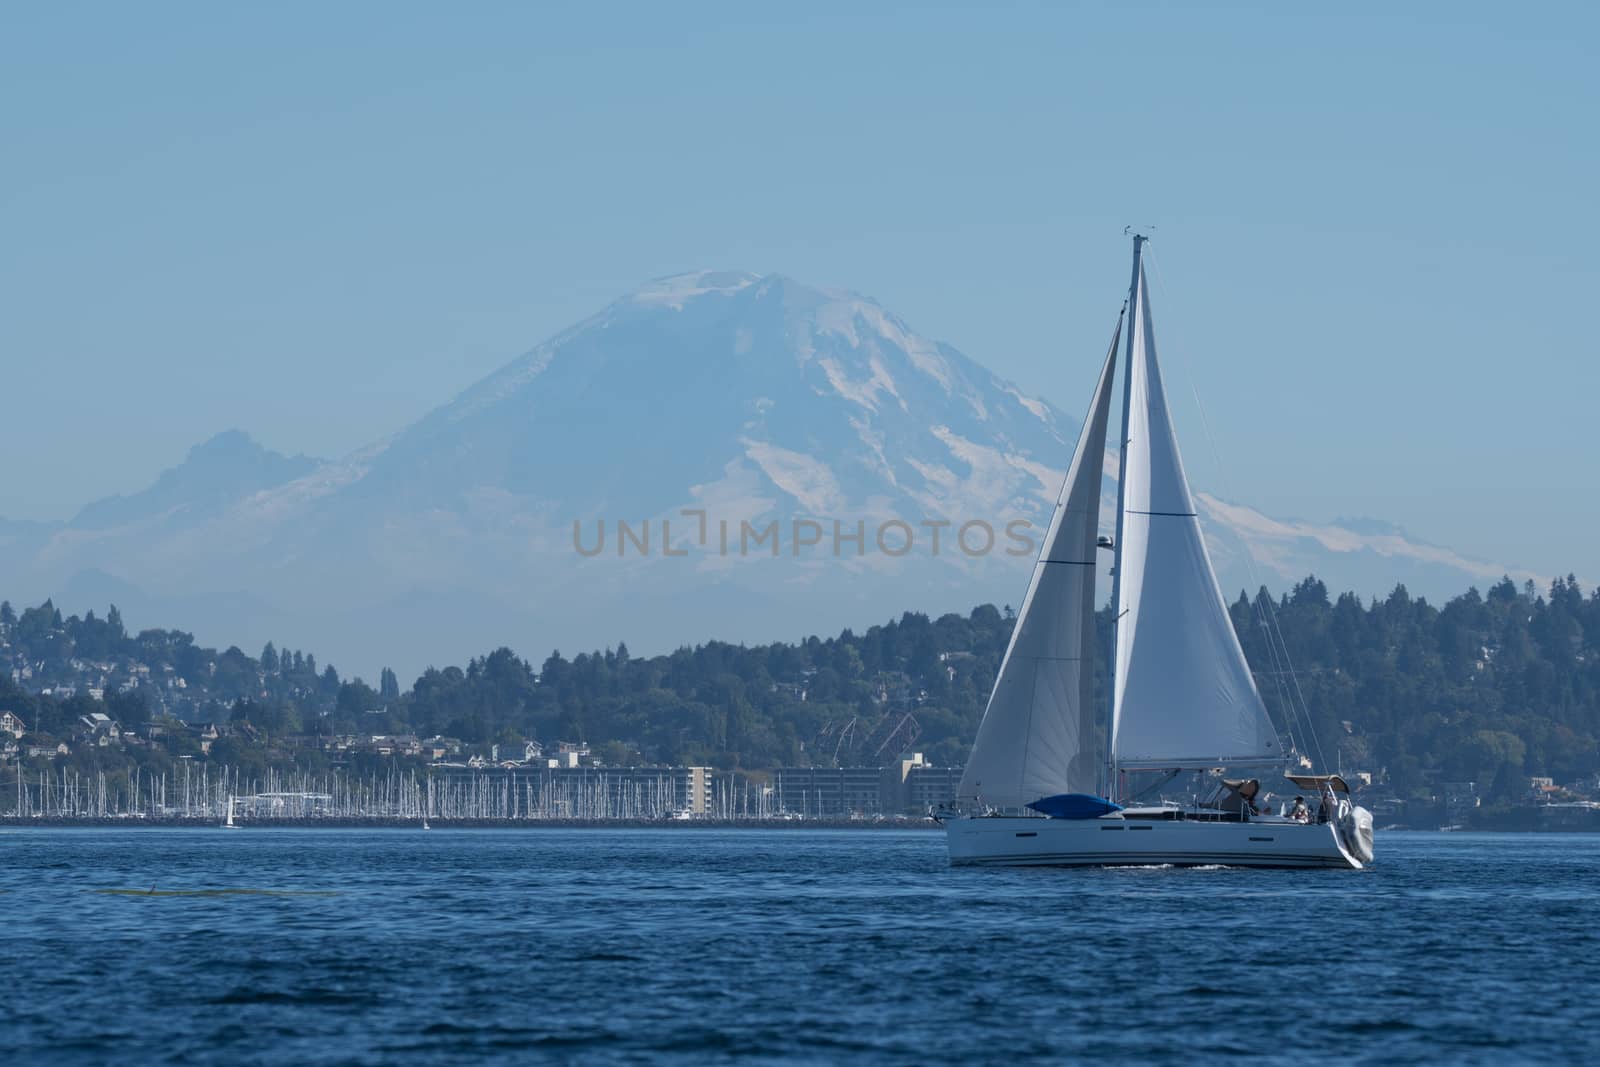 Afternoon sail on Elliott Bay by cestes001